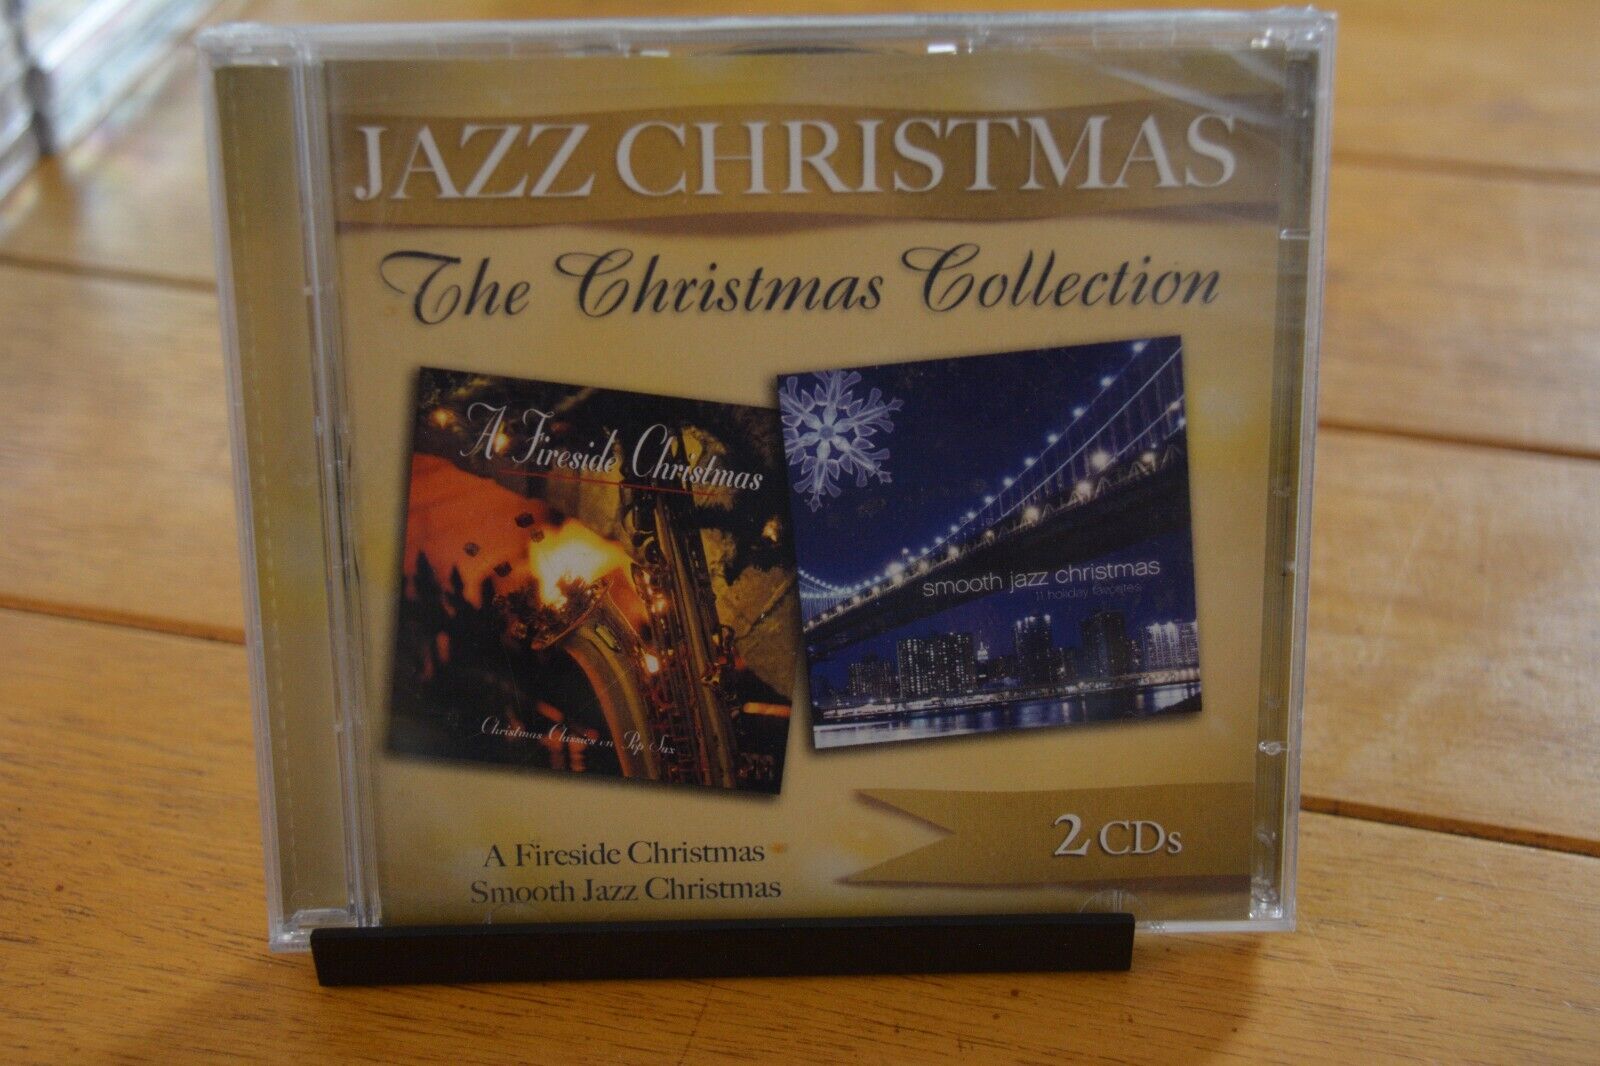 A FIRESIDE CHRISTMAS + SMOOTH JAZZ CHRISTMAS [NEW SEALED] 2 DISC VARIOUS [144]